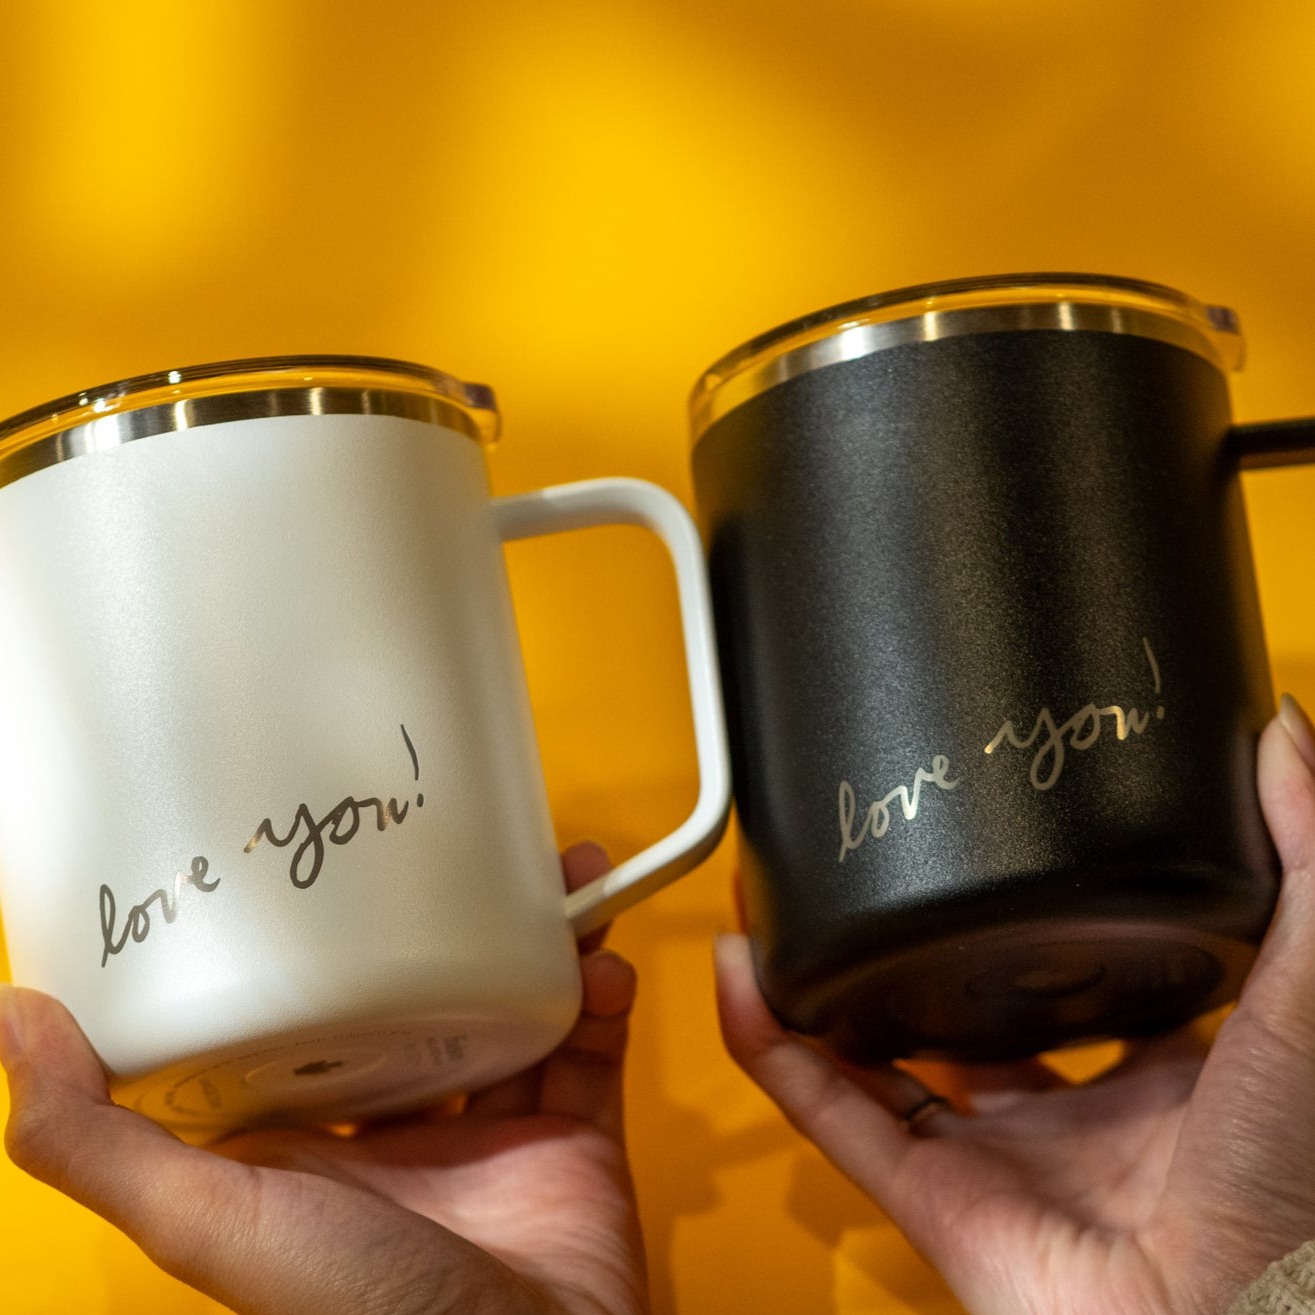 LAMOSE Personalized Insulated Mug with engraved images and text for Anniversary celebration, ideal for hot and cold beverages, perfect for gift giving.